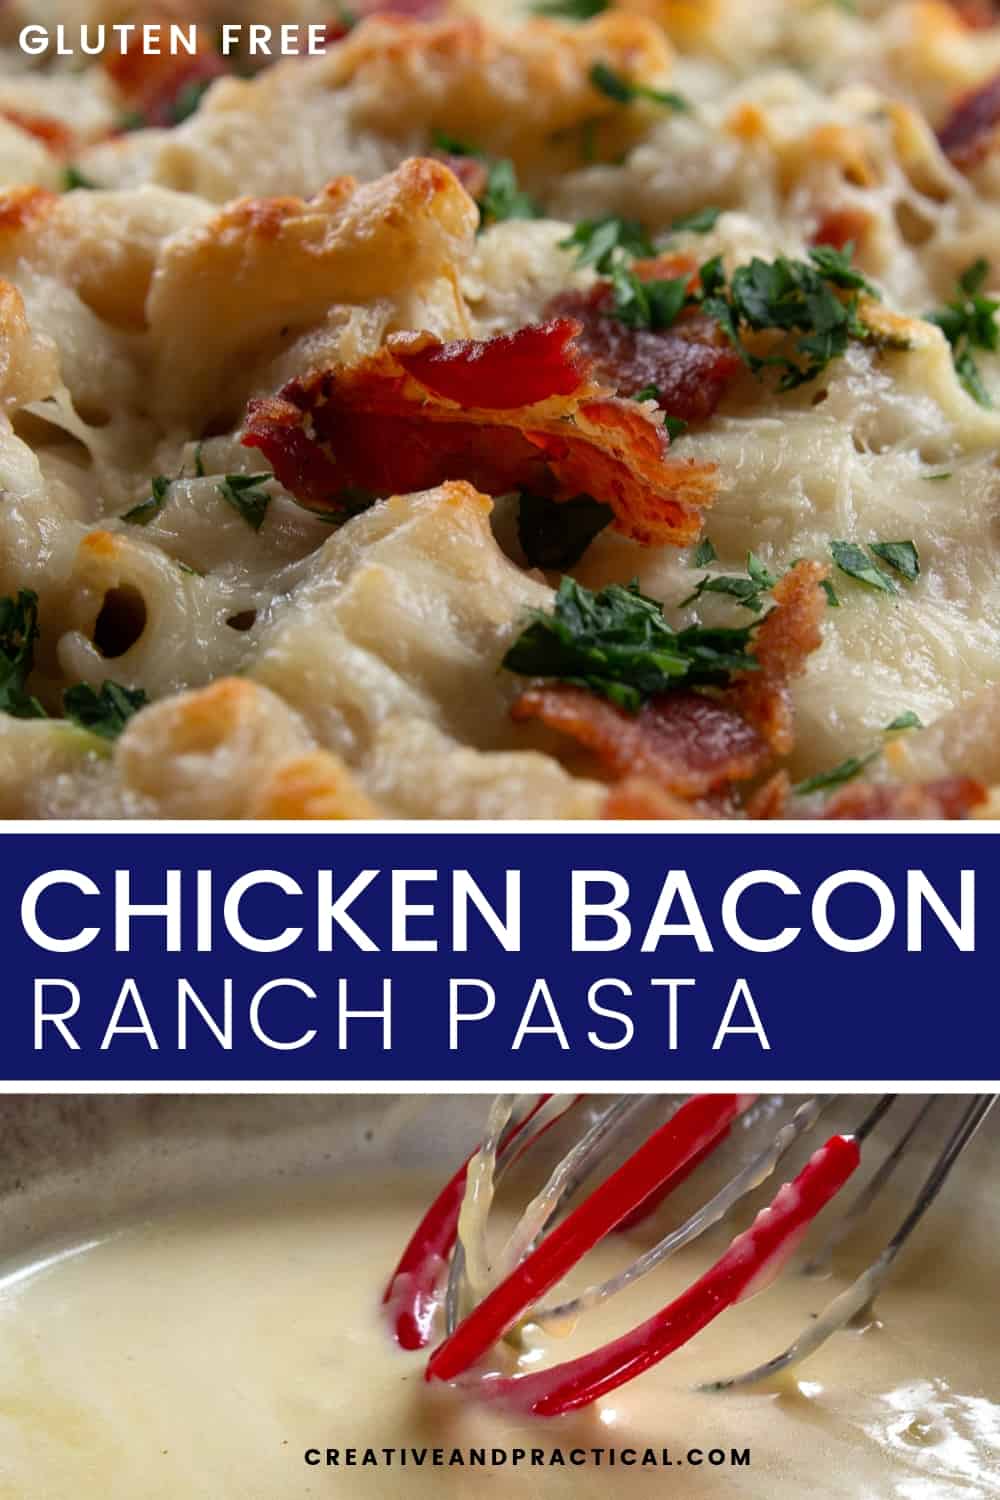 This easy, creamy, cheesy Chicken Bacon Ranch Pasta is a family favorite. It's perfect for weeknight dinners.  #cheerfulcook
#pasta #easydinner #casserole #easy #alfredo #recipe #cheesy  ♡ cheerfulcook.com via @cheerfulcook